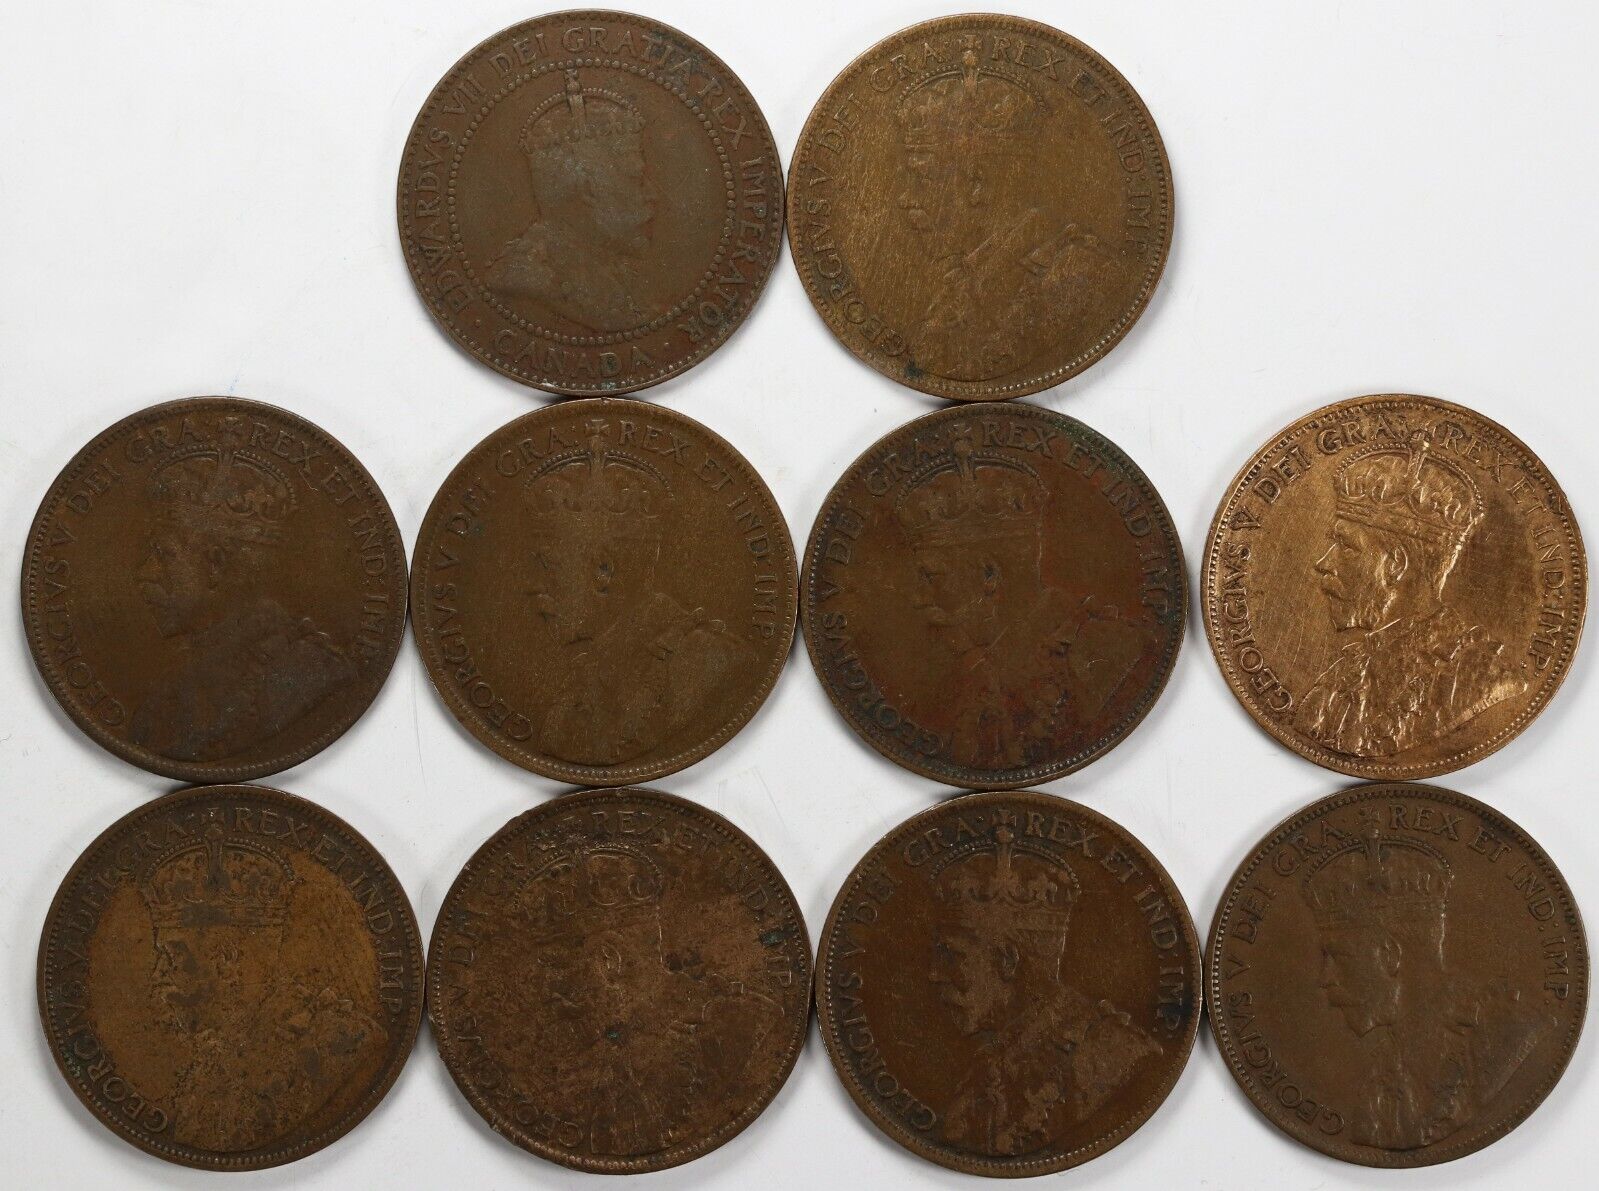 Lot of 10 Early 1900's Mixed Dates Canada Large Cents 1c - Nice